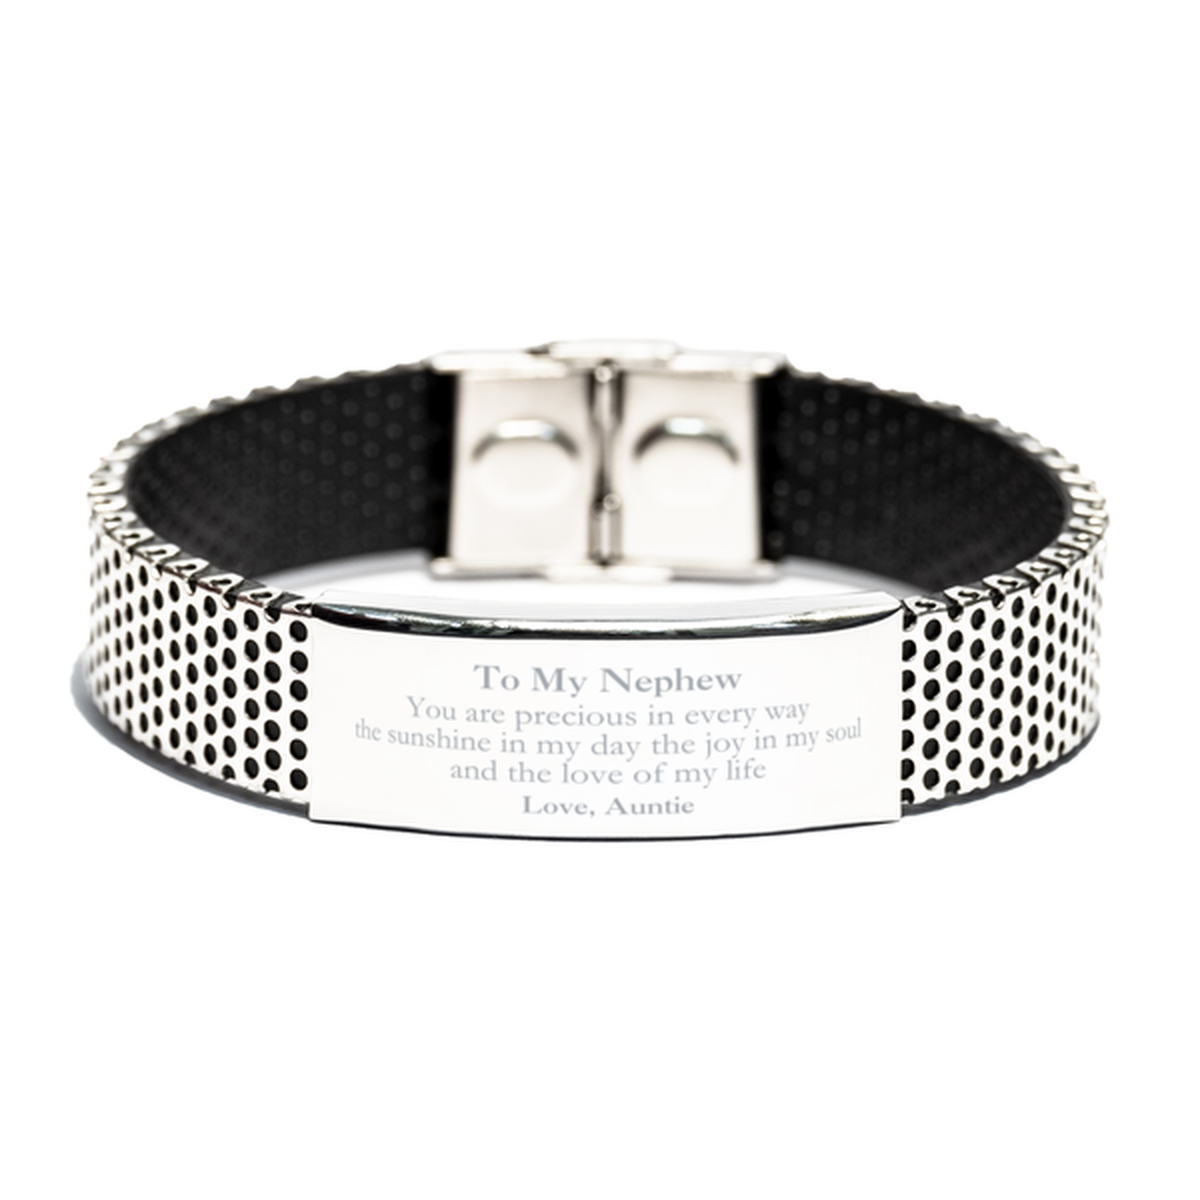 Graduation Gifts for Nephew Stainless Steel Bracelet Present from Auntie, Christmas Nephew Birthday Gifts Nephew You are precious in every way the sunshine in my day. Love, Auntie